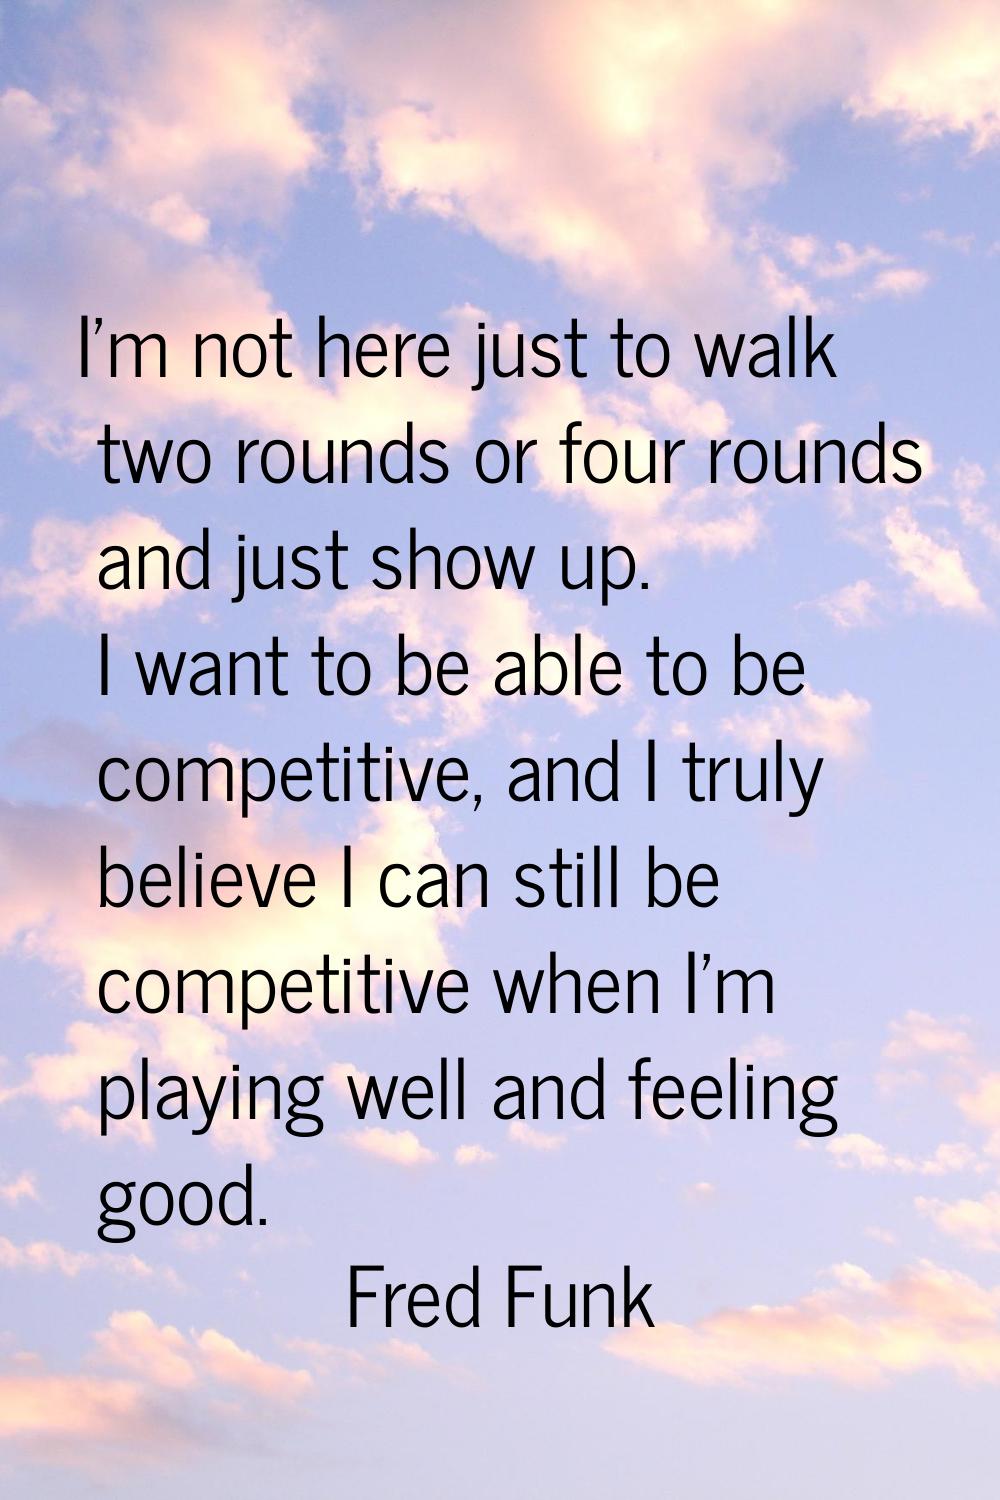 I'm not here just to walk two rounds or four rounds and just show up. I want to be able to be compe